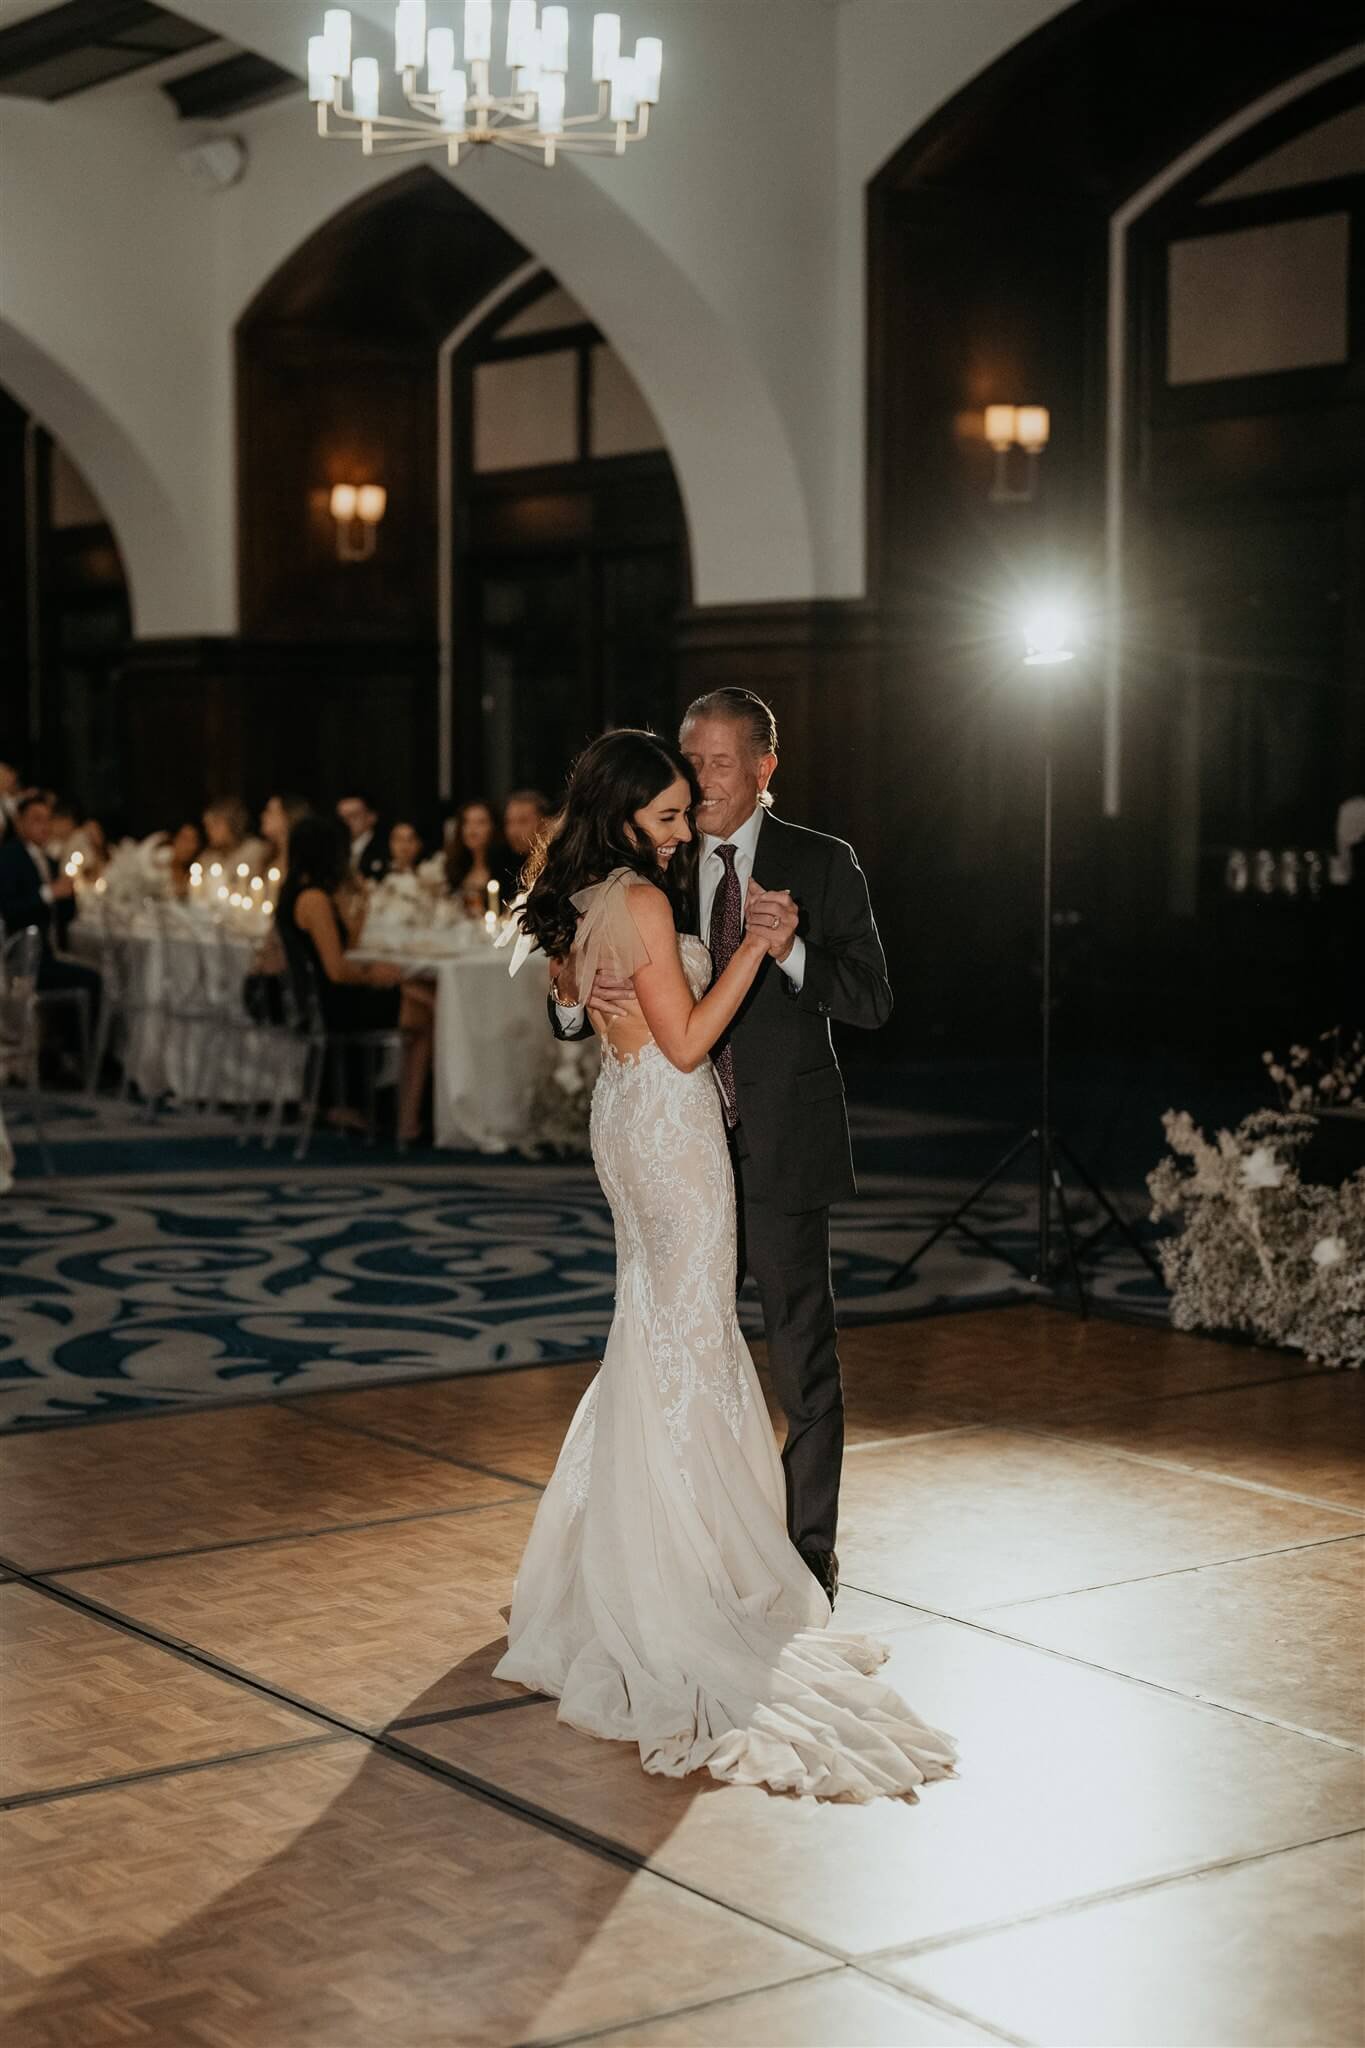 Bride and father first dance at Lake Louise wedding